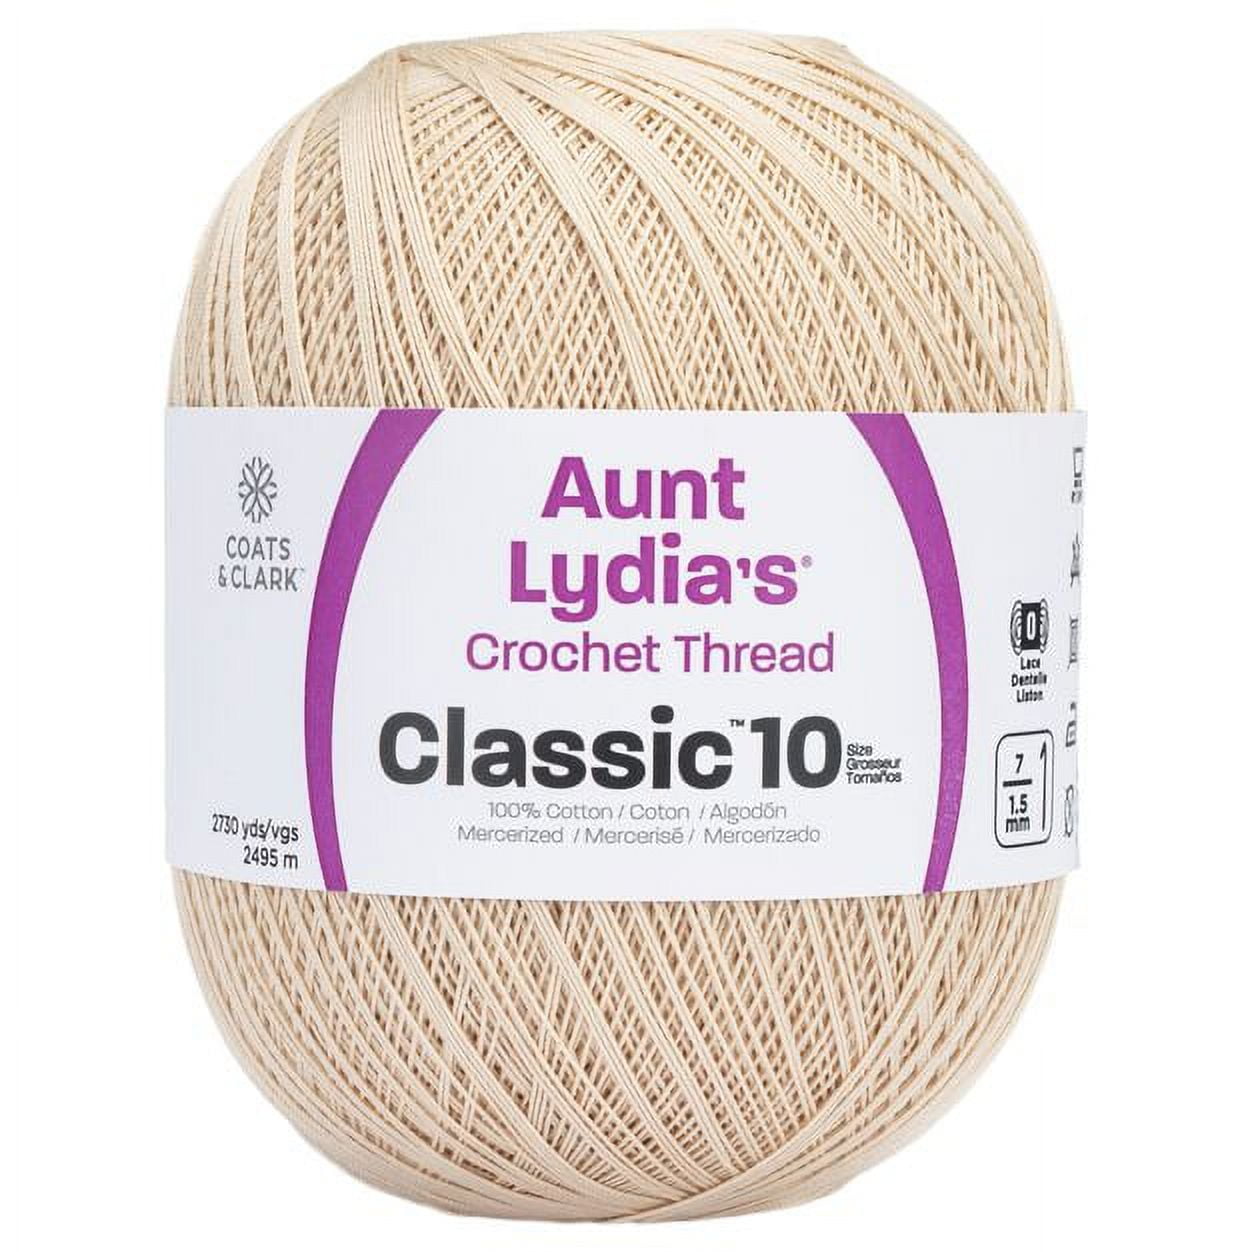 Aunt Lydia's Classic Crochet Thread Size 10-Navy, 1 count - Foods Co.